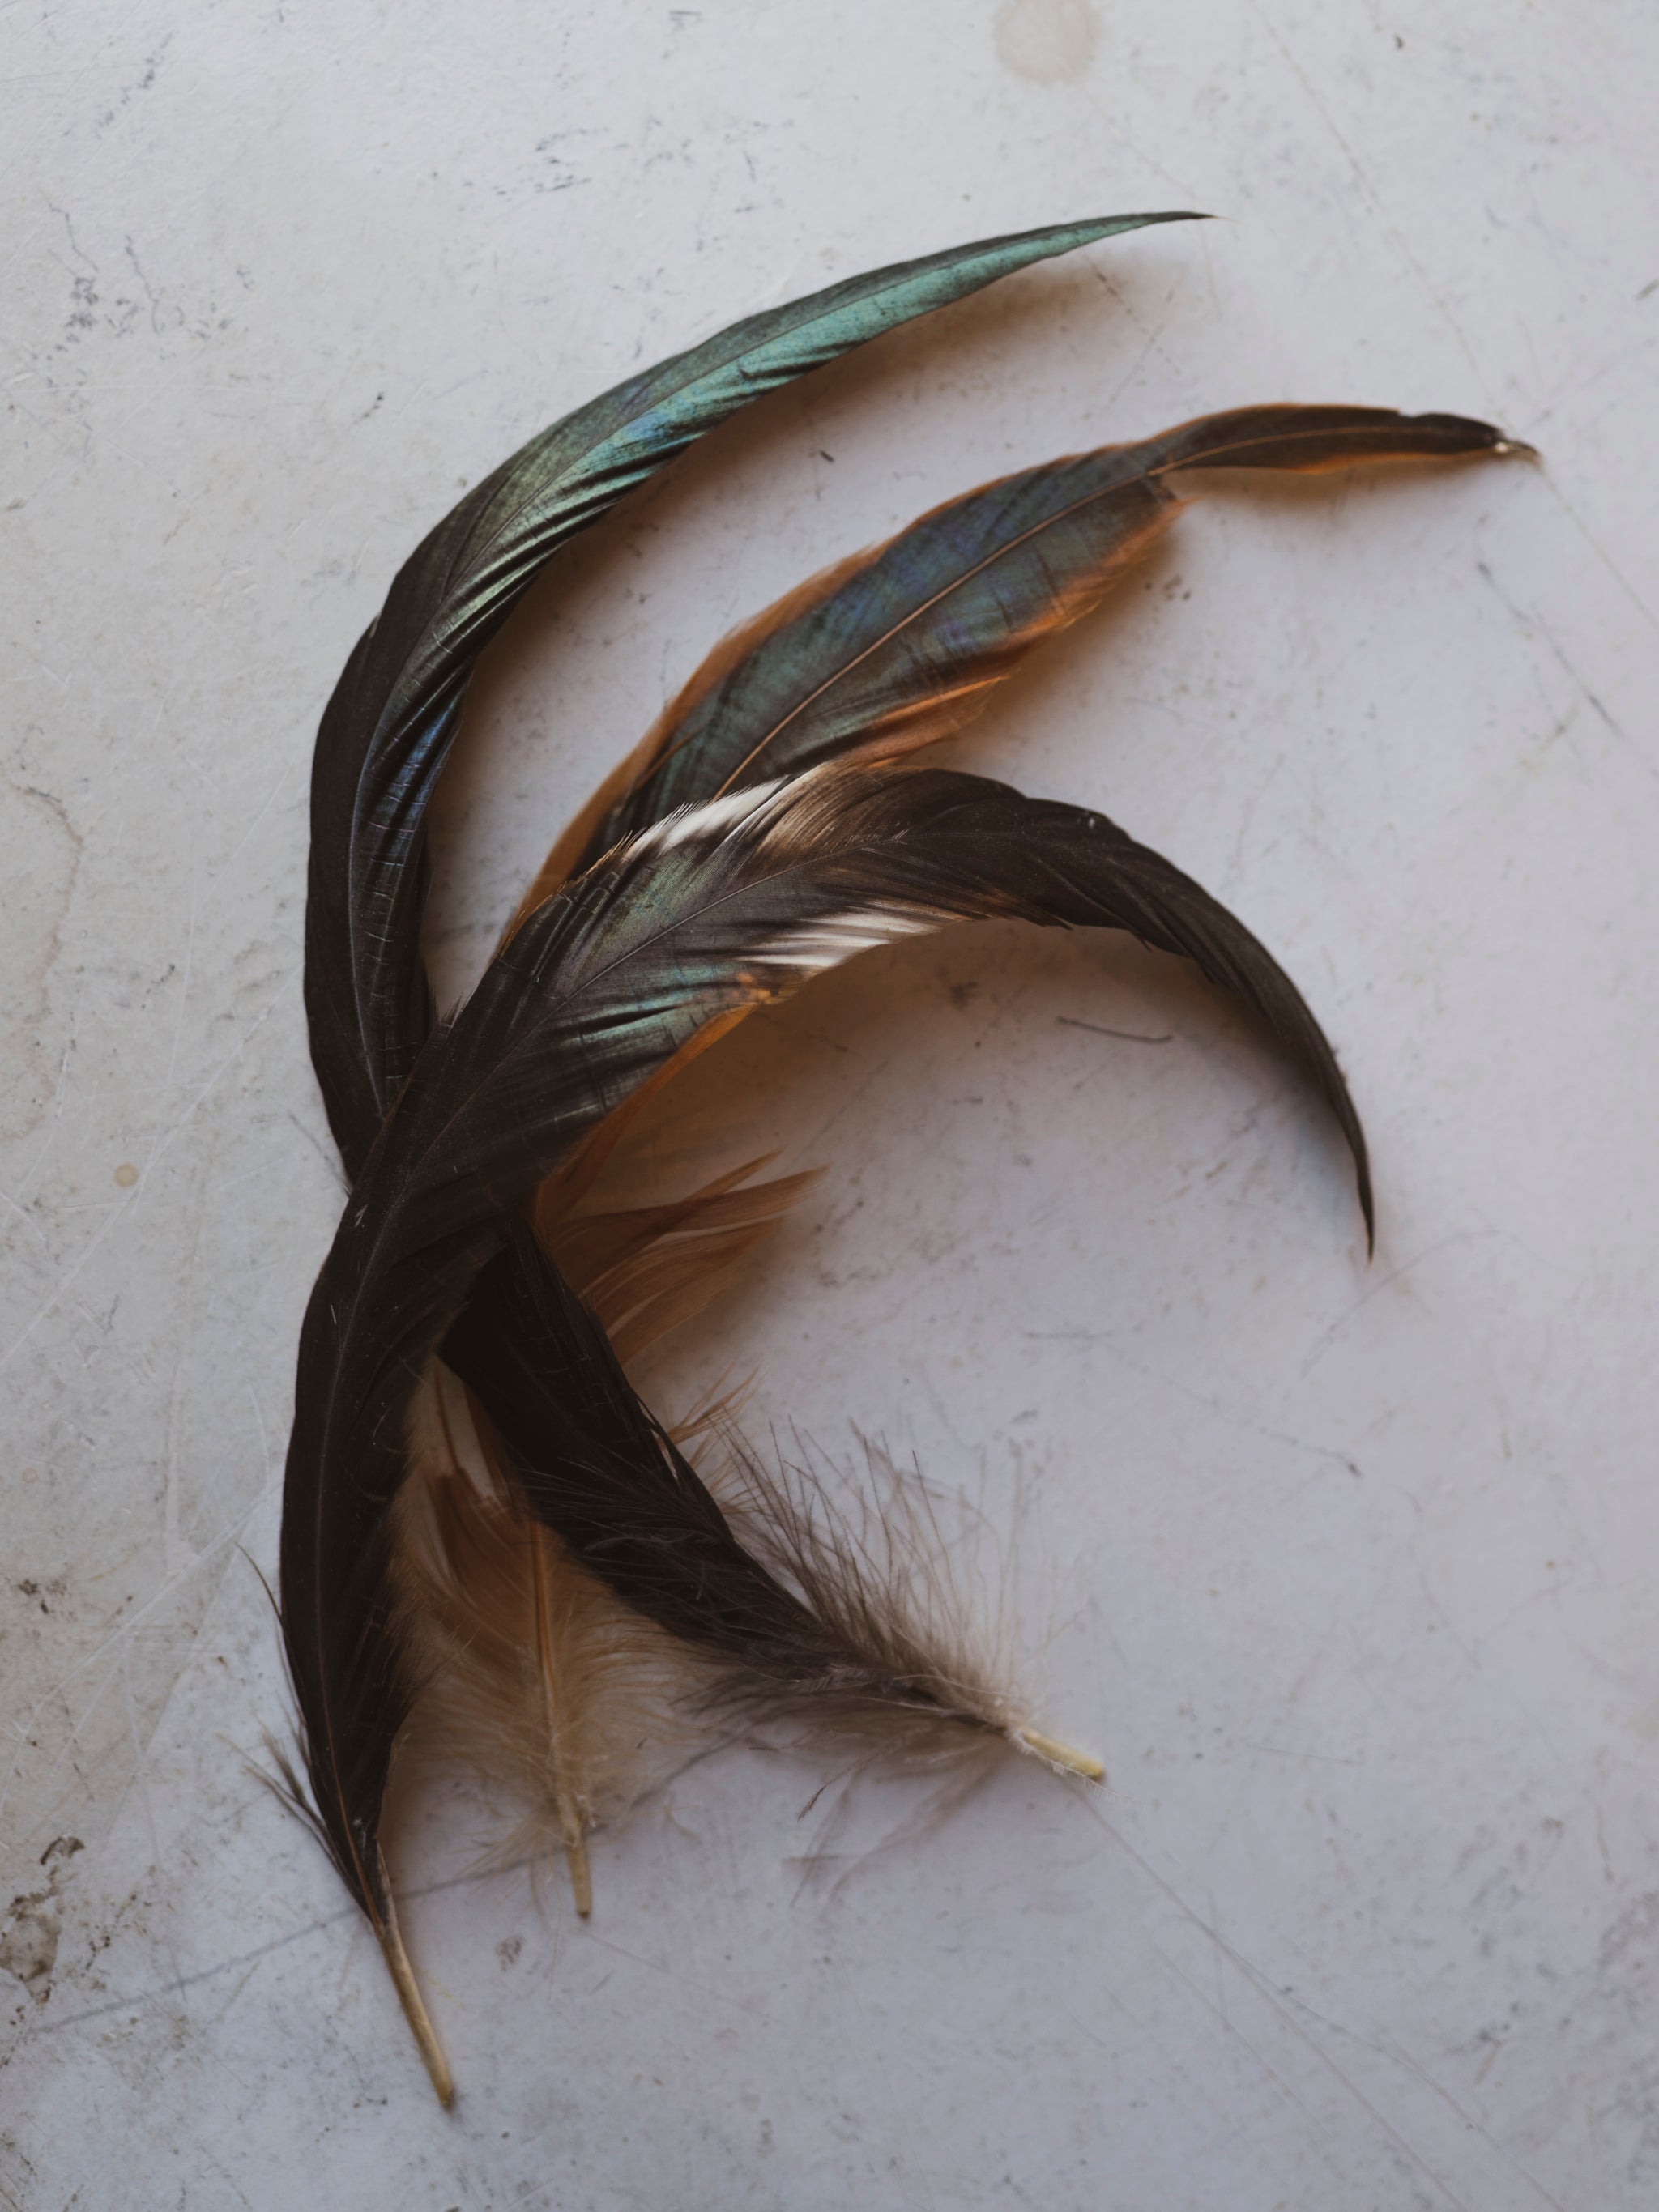 Zucker Feather Products Rooster Coque Tails Feathers Bronze - 10-12 inch x 1 yd - Natural